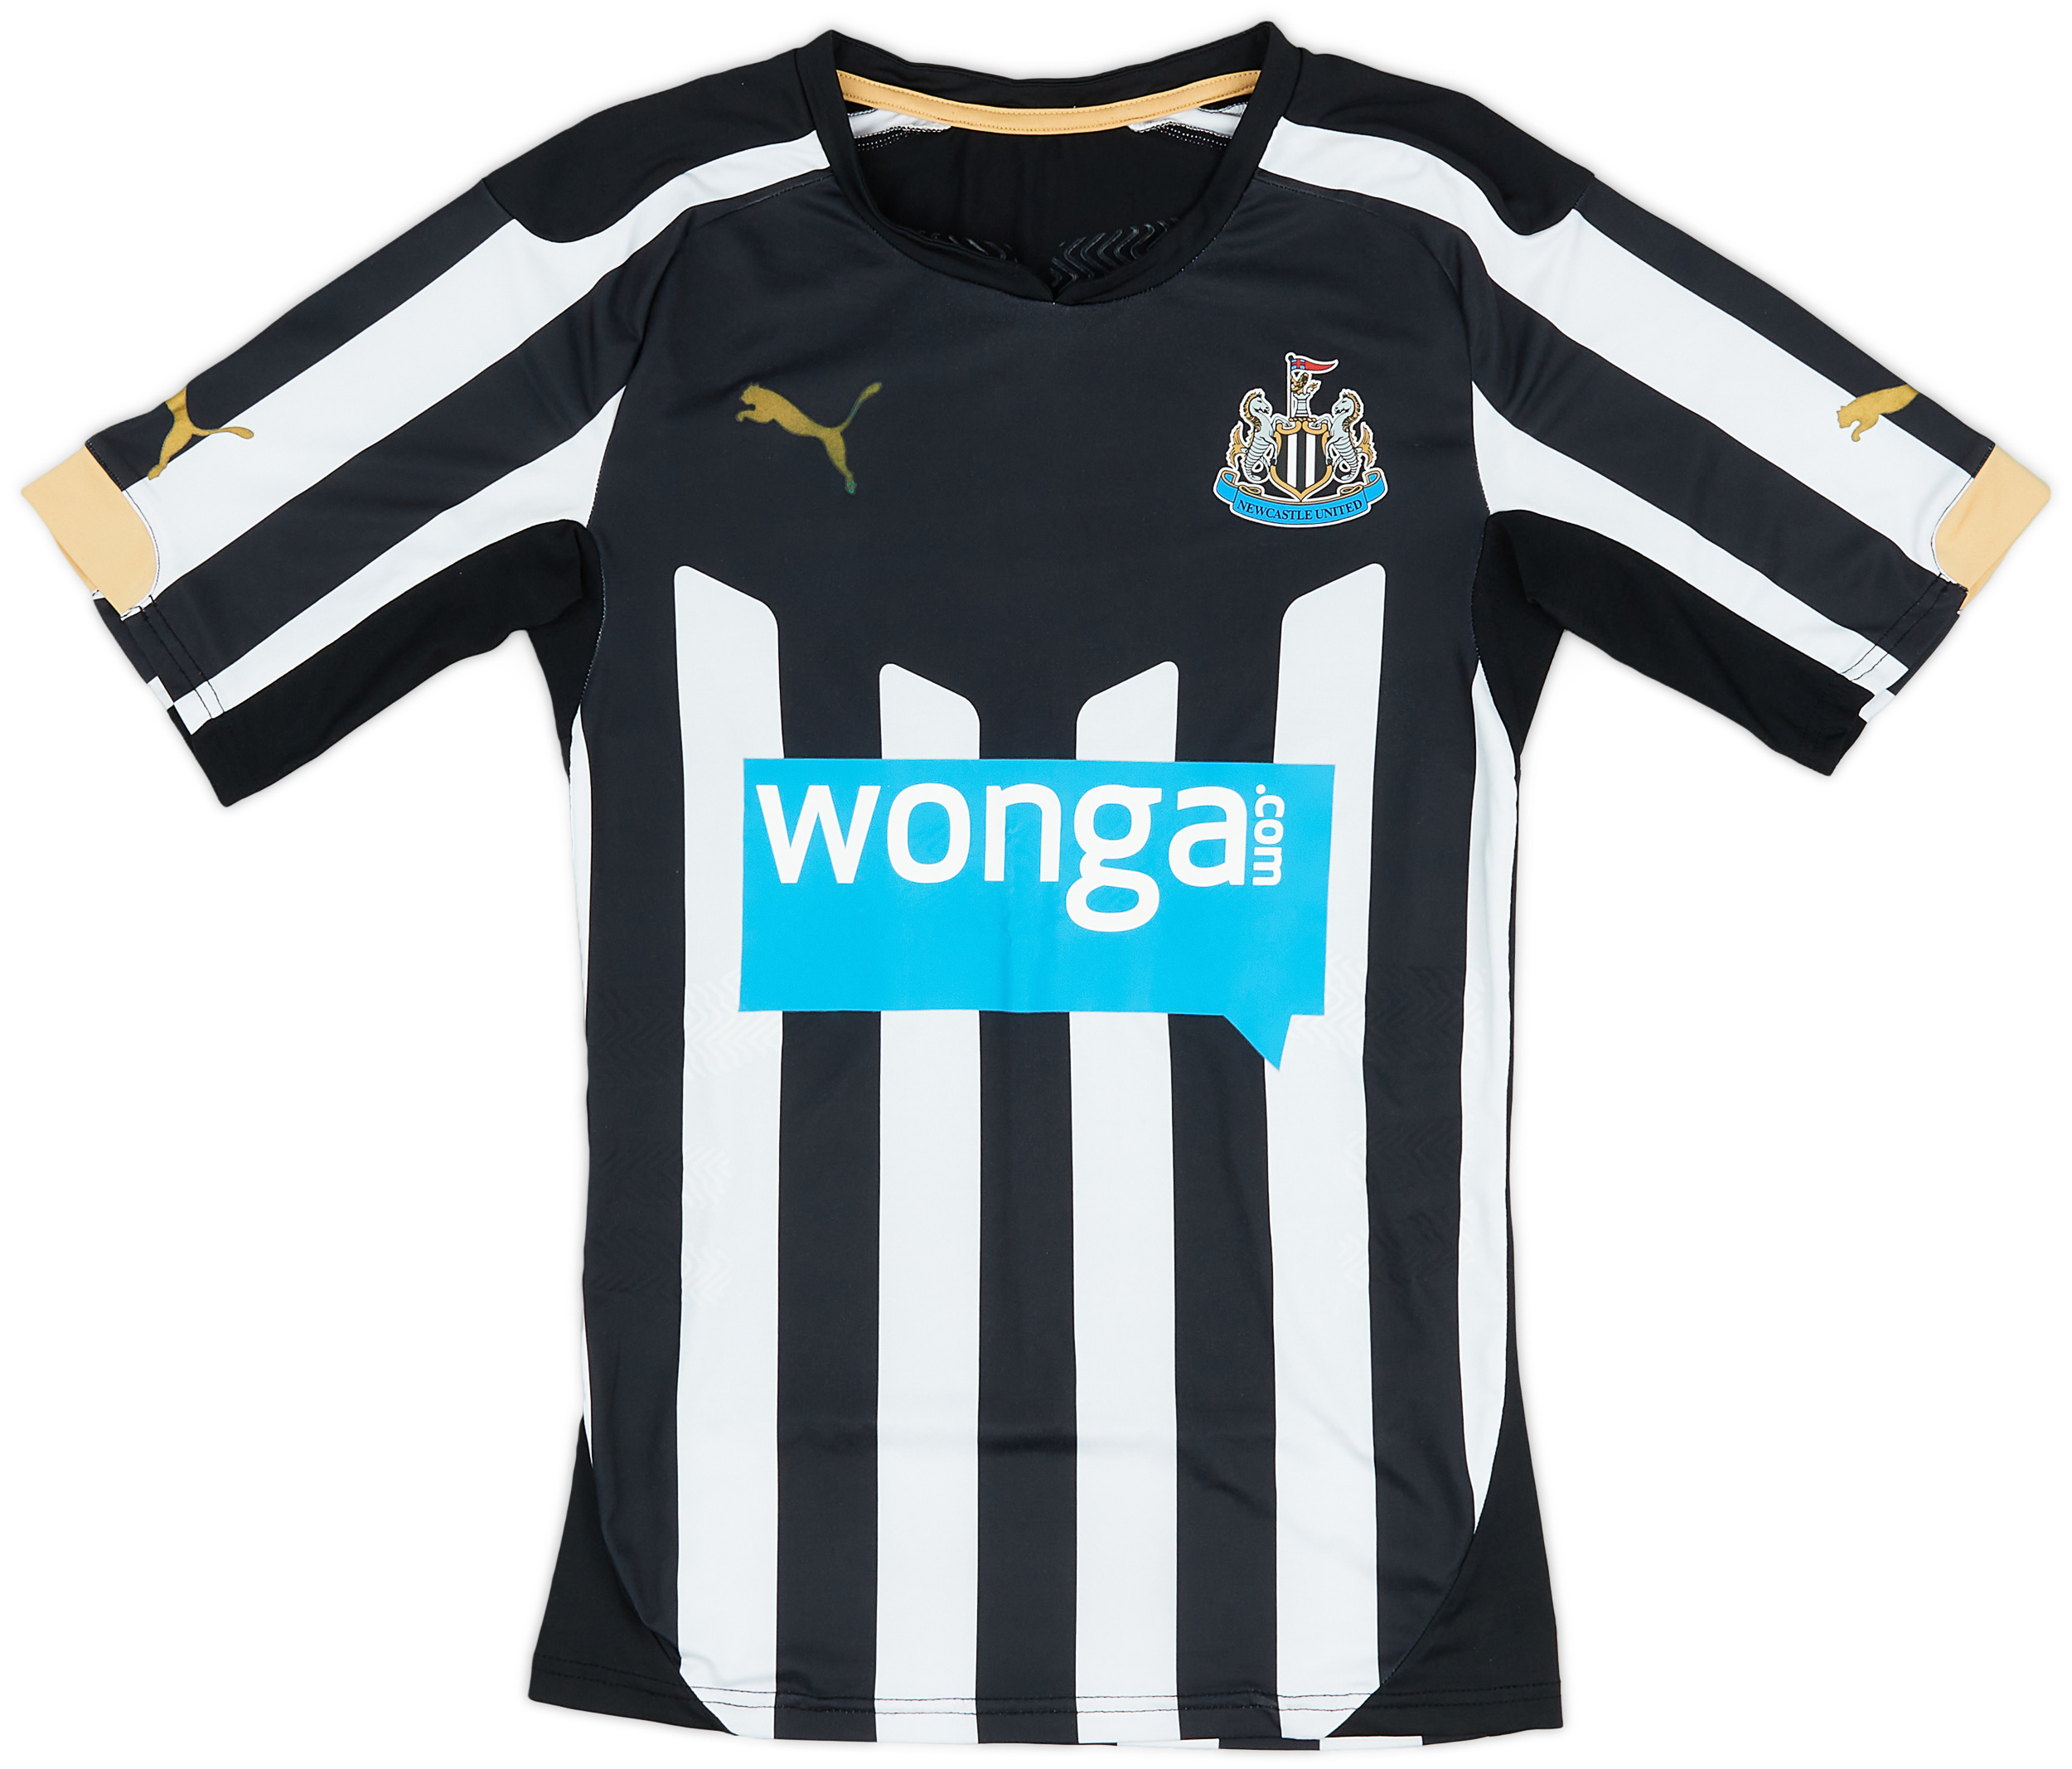 2014-15 Newcastle United Player Issue Home Shirt - 6/10 - ()